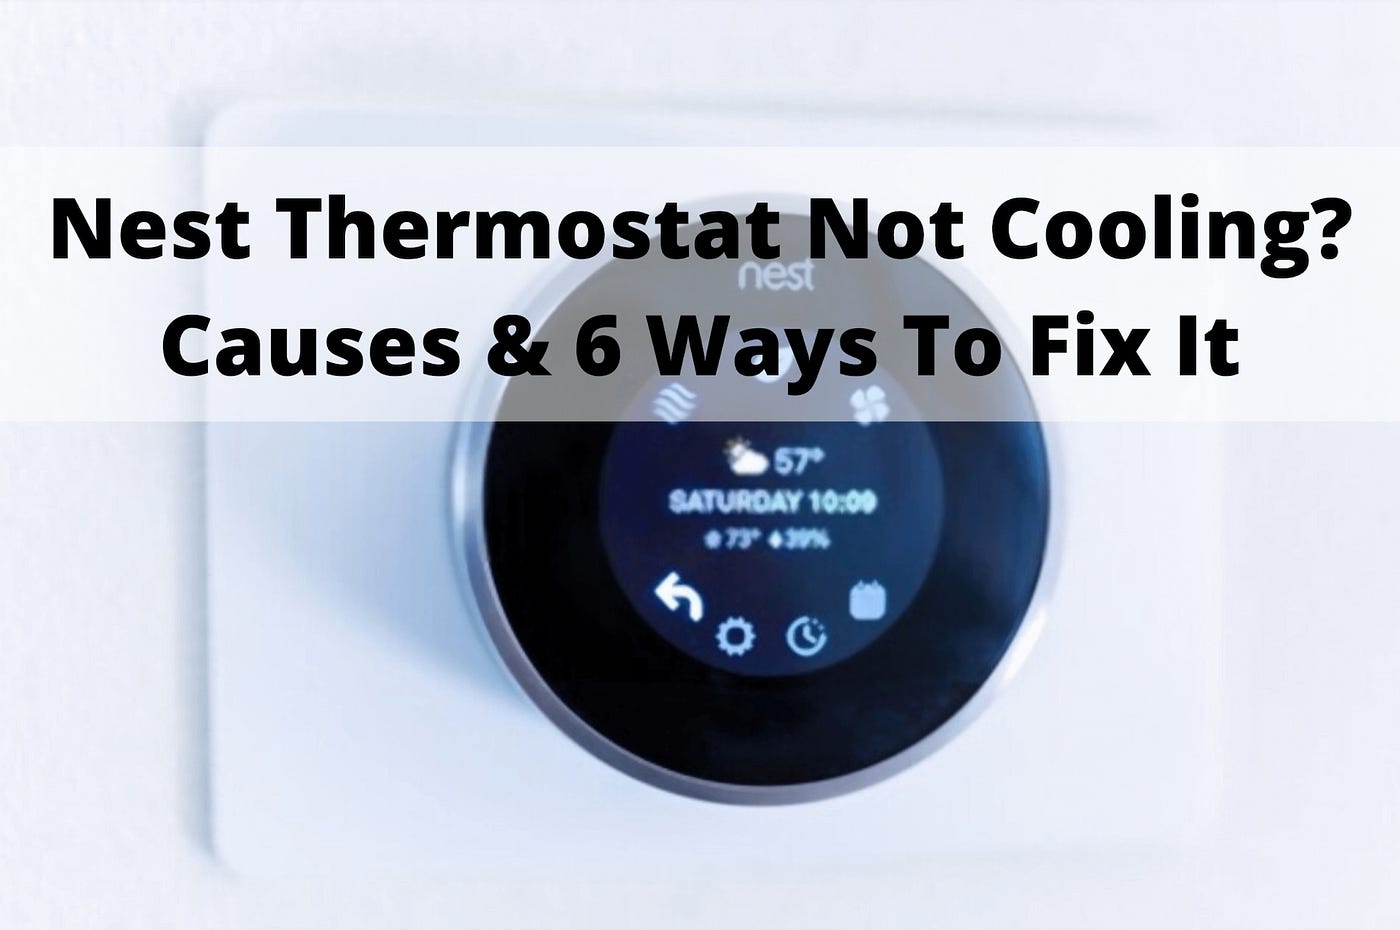 6 Fixes: Nest Thermostat Not Cooling | by Benjamin Johnson | Medium